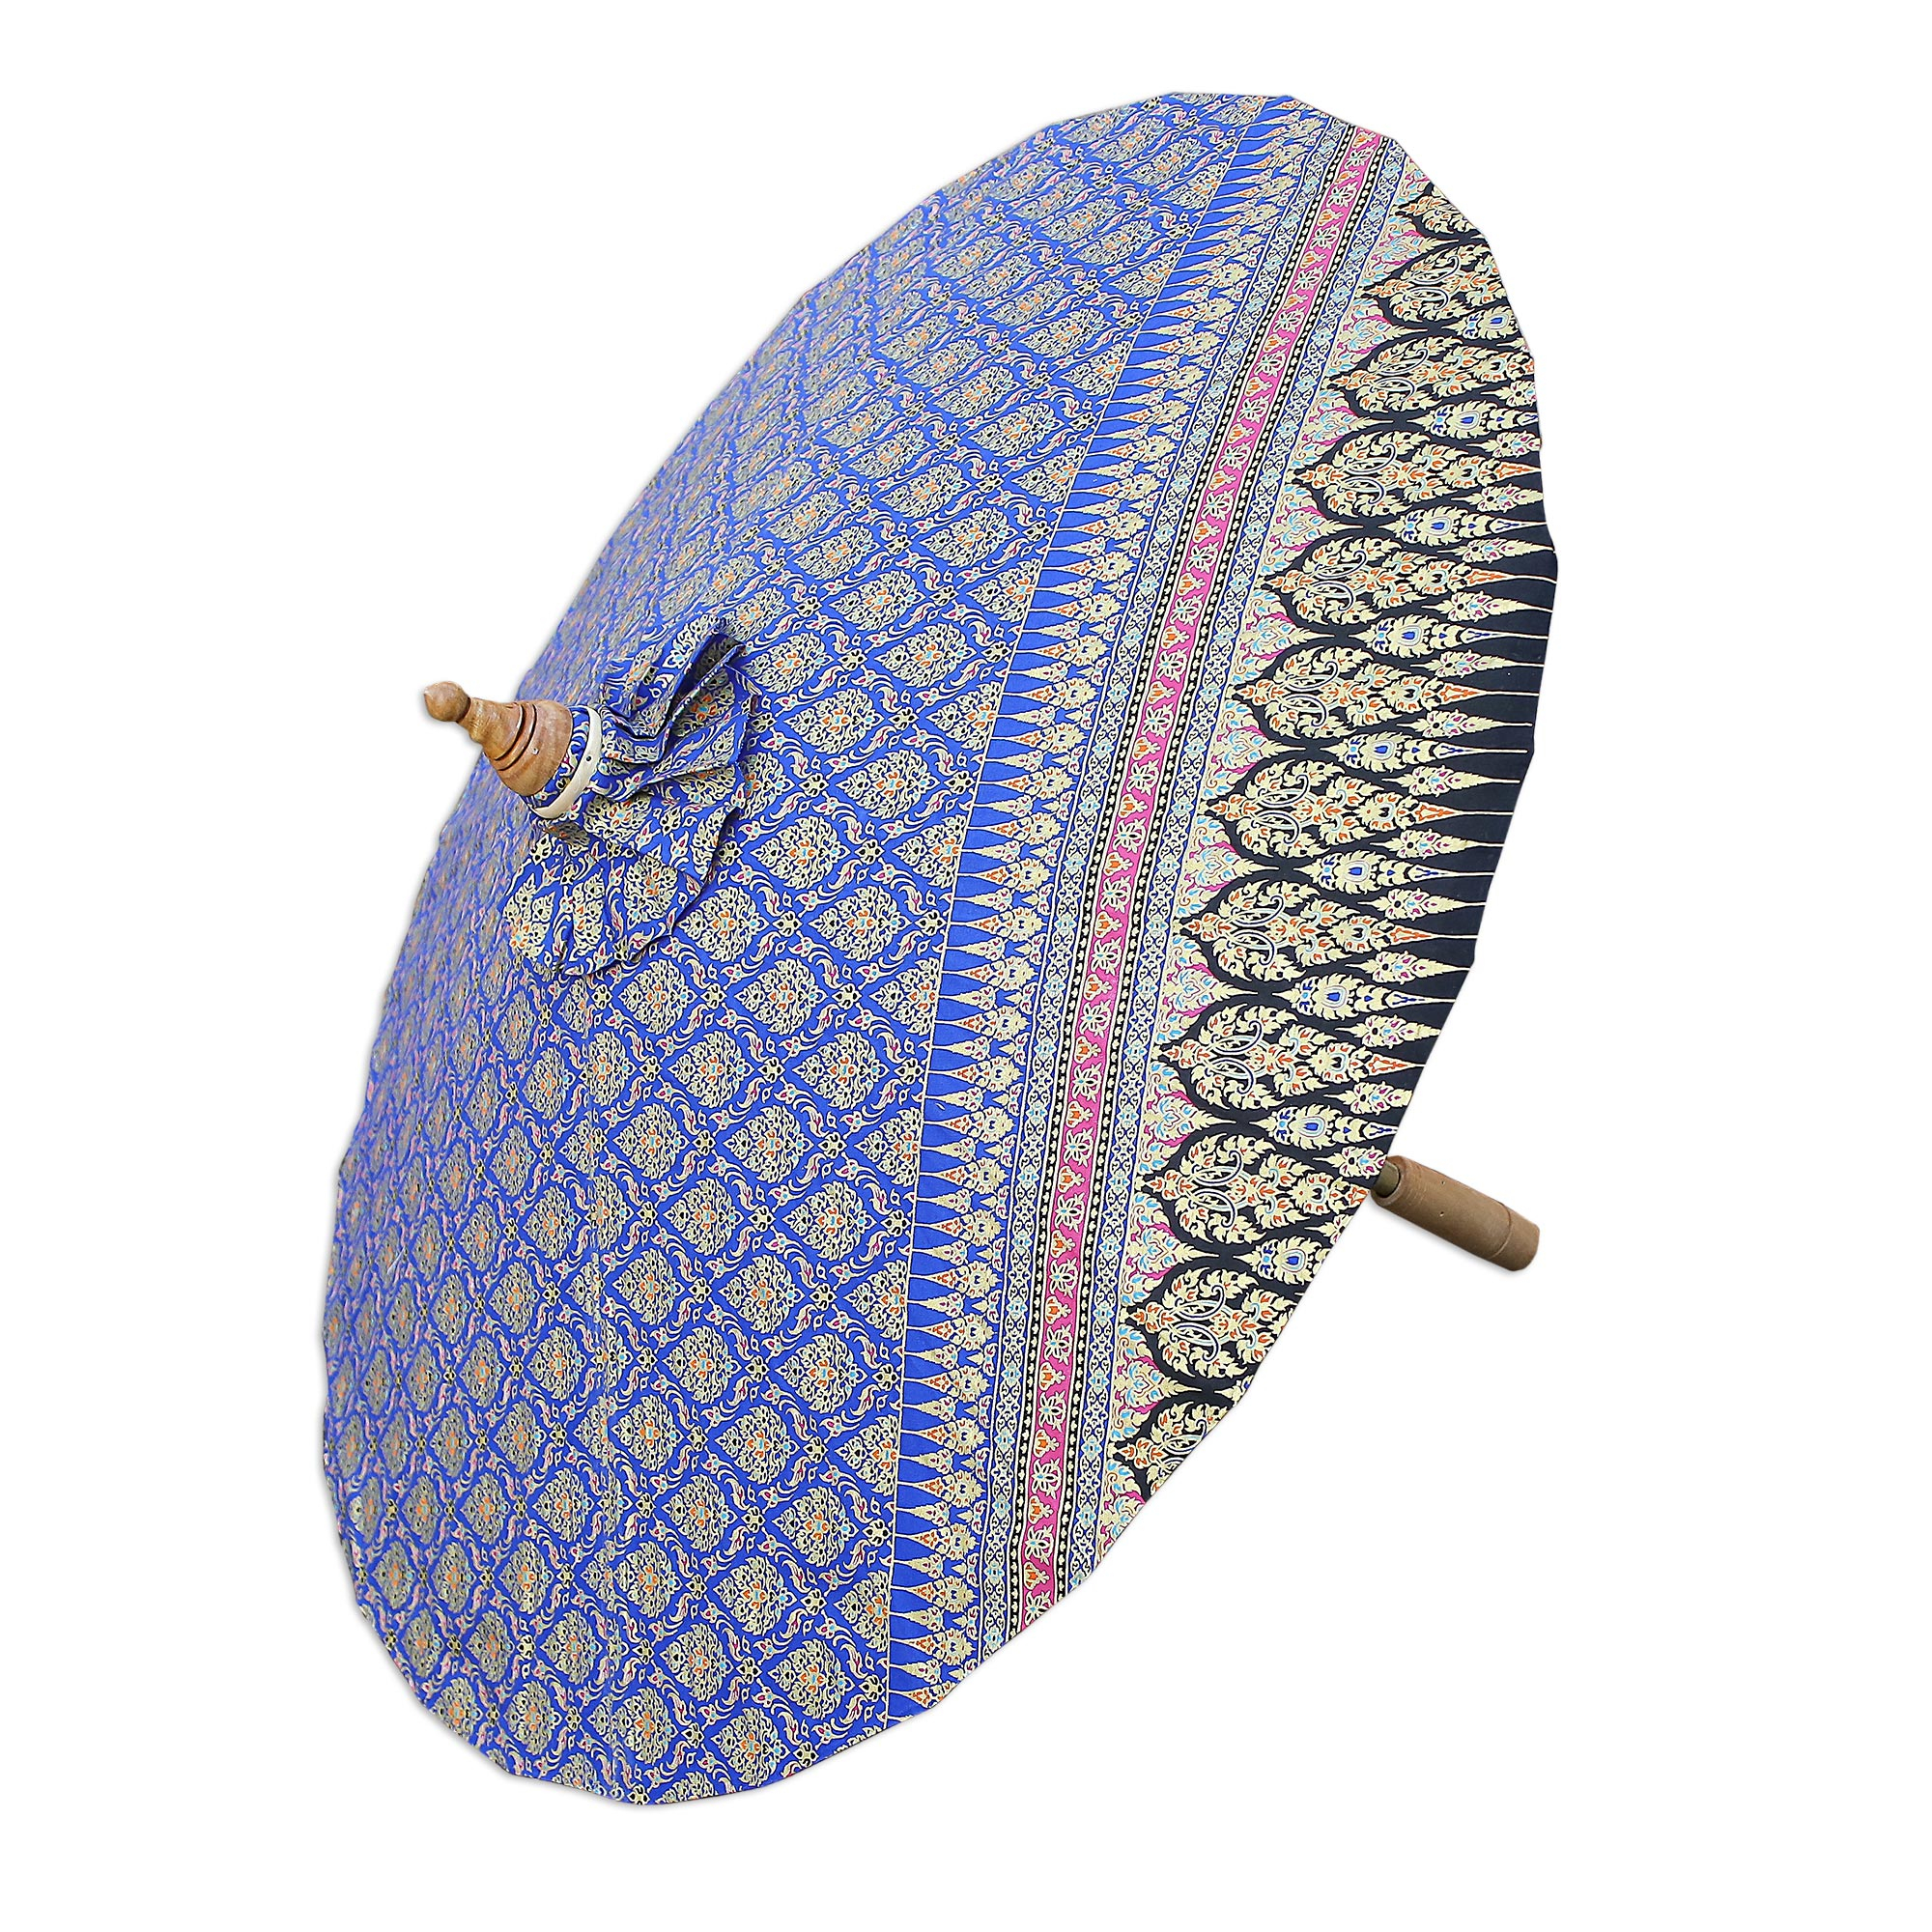 Printed Cotton Parasol in Blue from Thailand - Thai Royalty in Blue ...